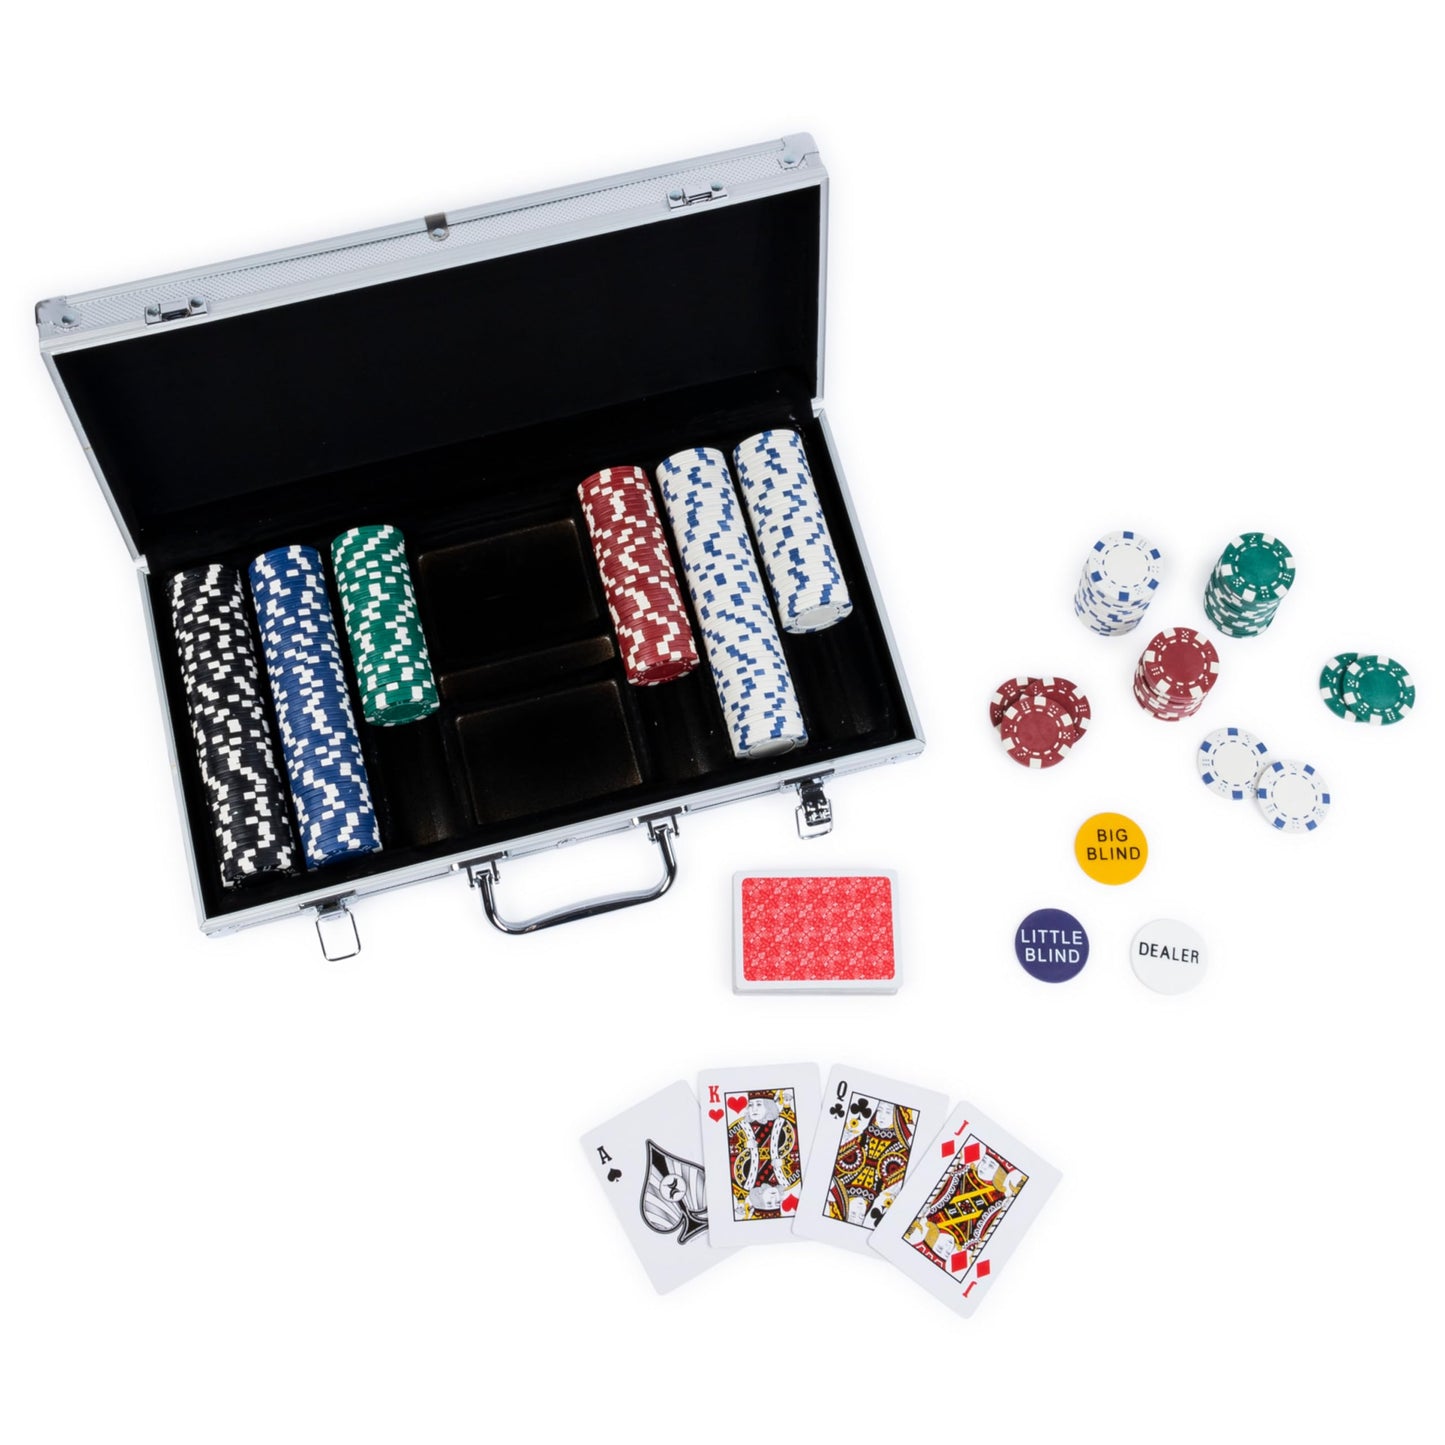 Cardinal Classics, 300-Piece Poker Set with Aluminum Carrying Case & Professional Weight Chips Plus 5 Poker Dice, Casino Game for Adults and Kids Ages 8 and up - amzGamess